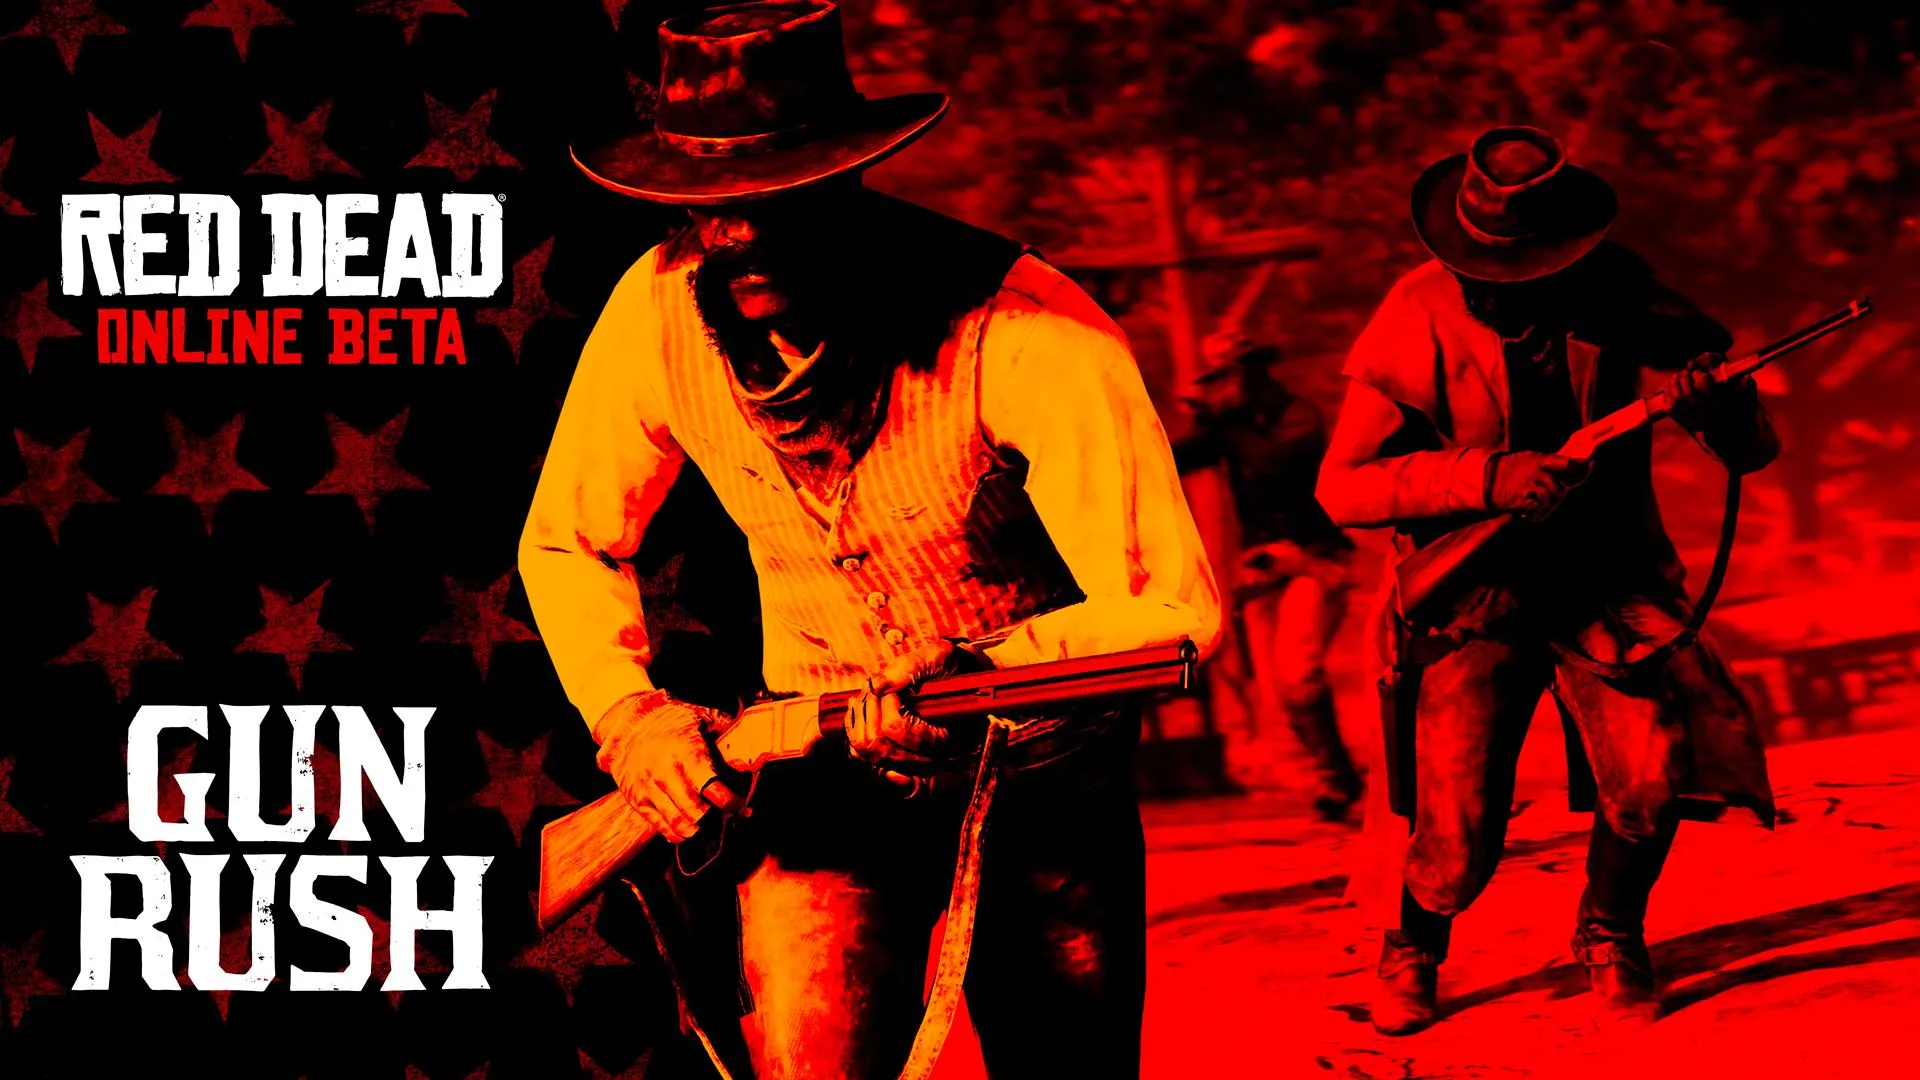 New Gun Rush Battle Royale Mode added to Red Dead Online, plus more to come